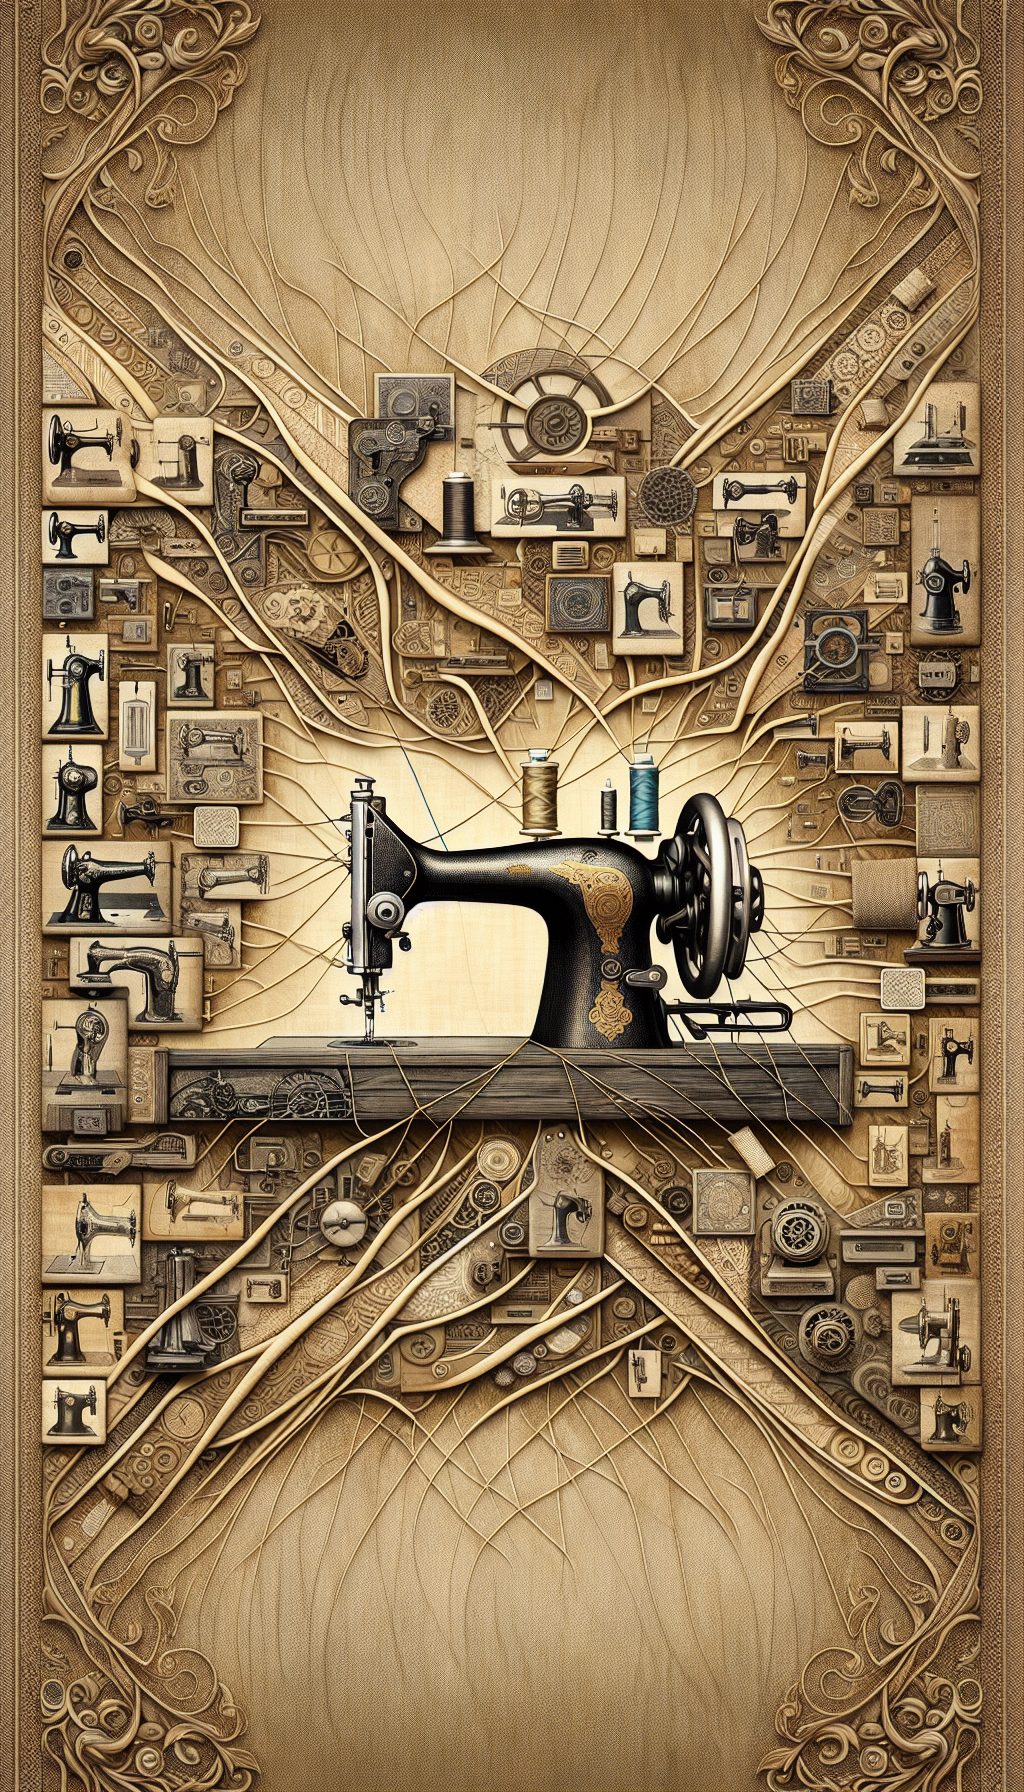 An ornate collage style illustration featuring a tapestry of interwoven fabric strips, each strip showcasing a different era's vintage sewing machine in muted sepia tones, with trail of shimmering gold stitches connecting them. At the forefront, a prominent, exquisitely detailed antique sewing machine adorned with price tags indicating its high value, subtly emphasizing the precious heritage and timeless worth of these historical artifacts.